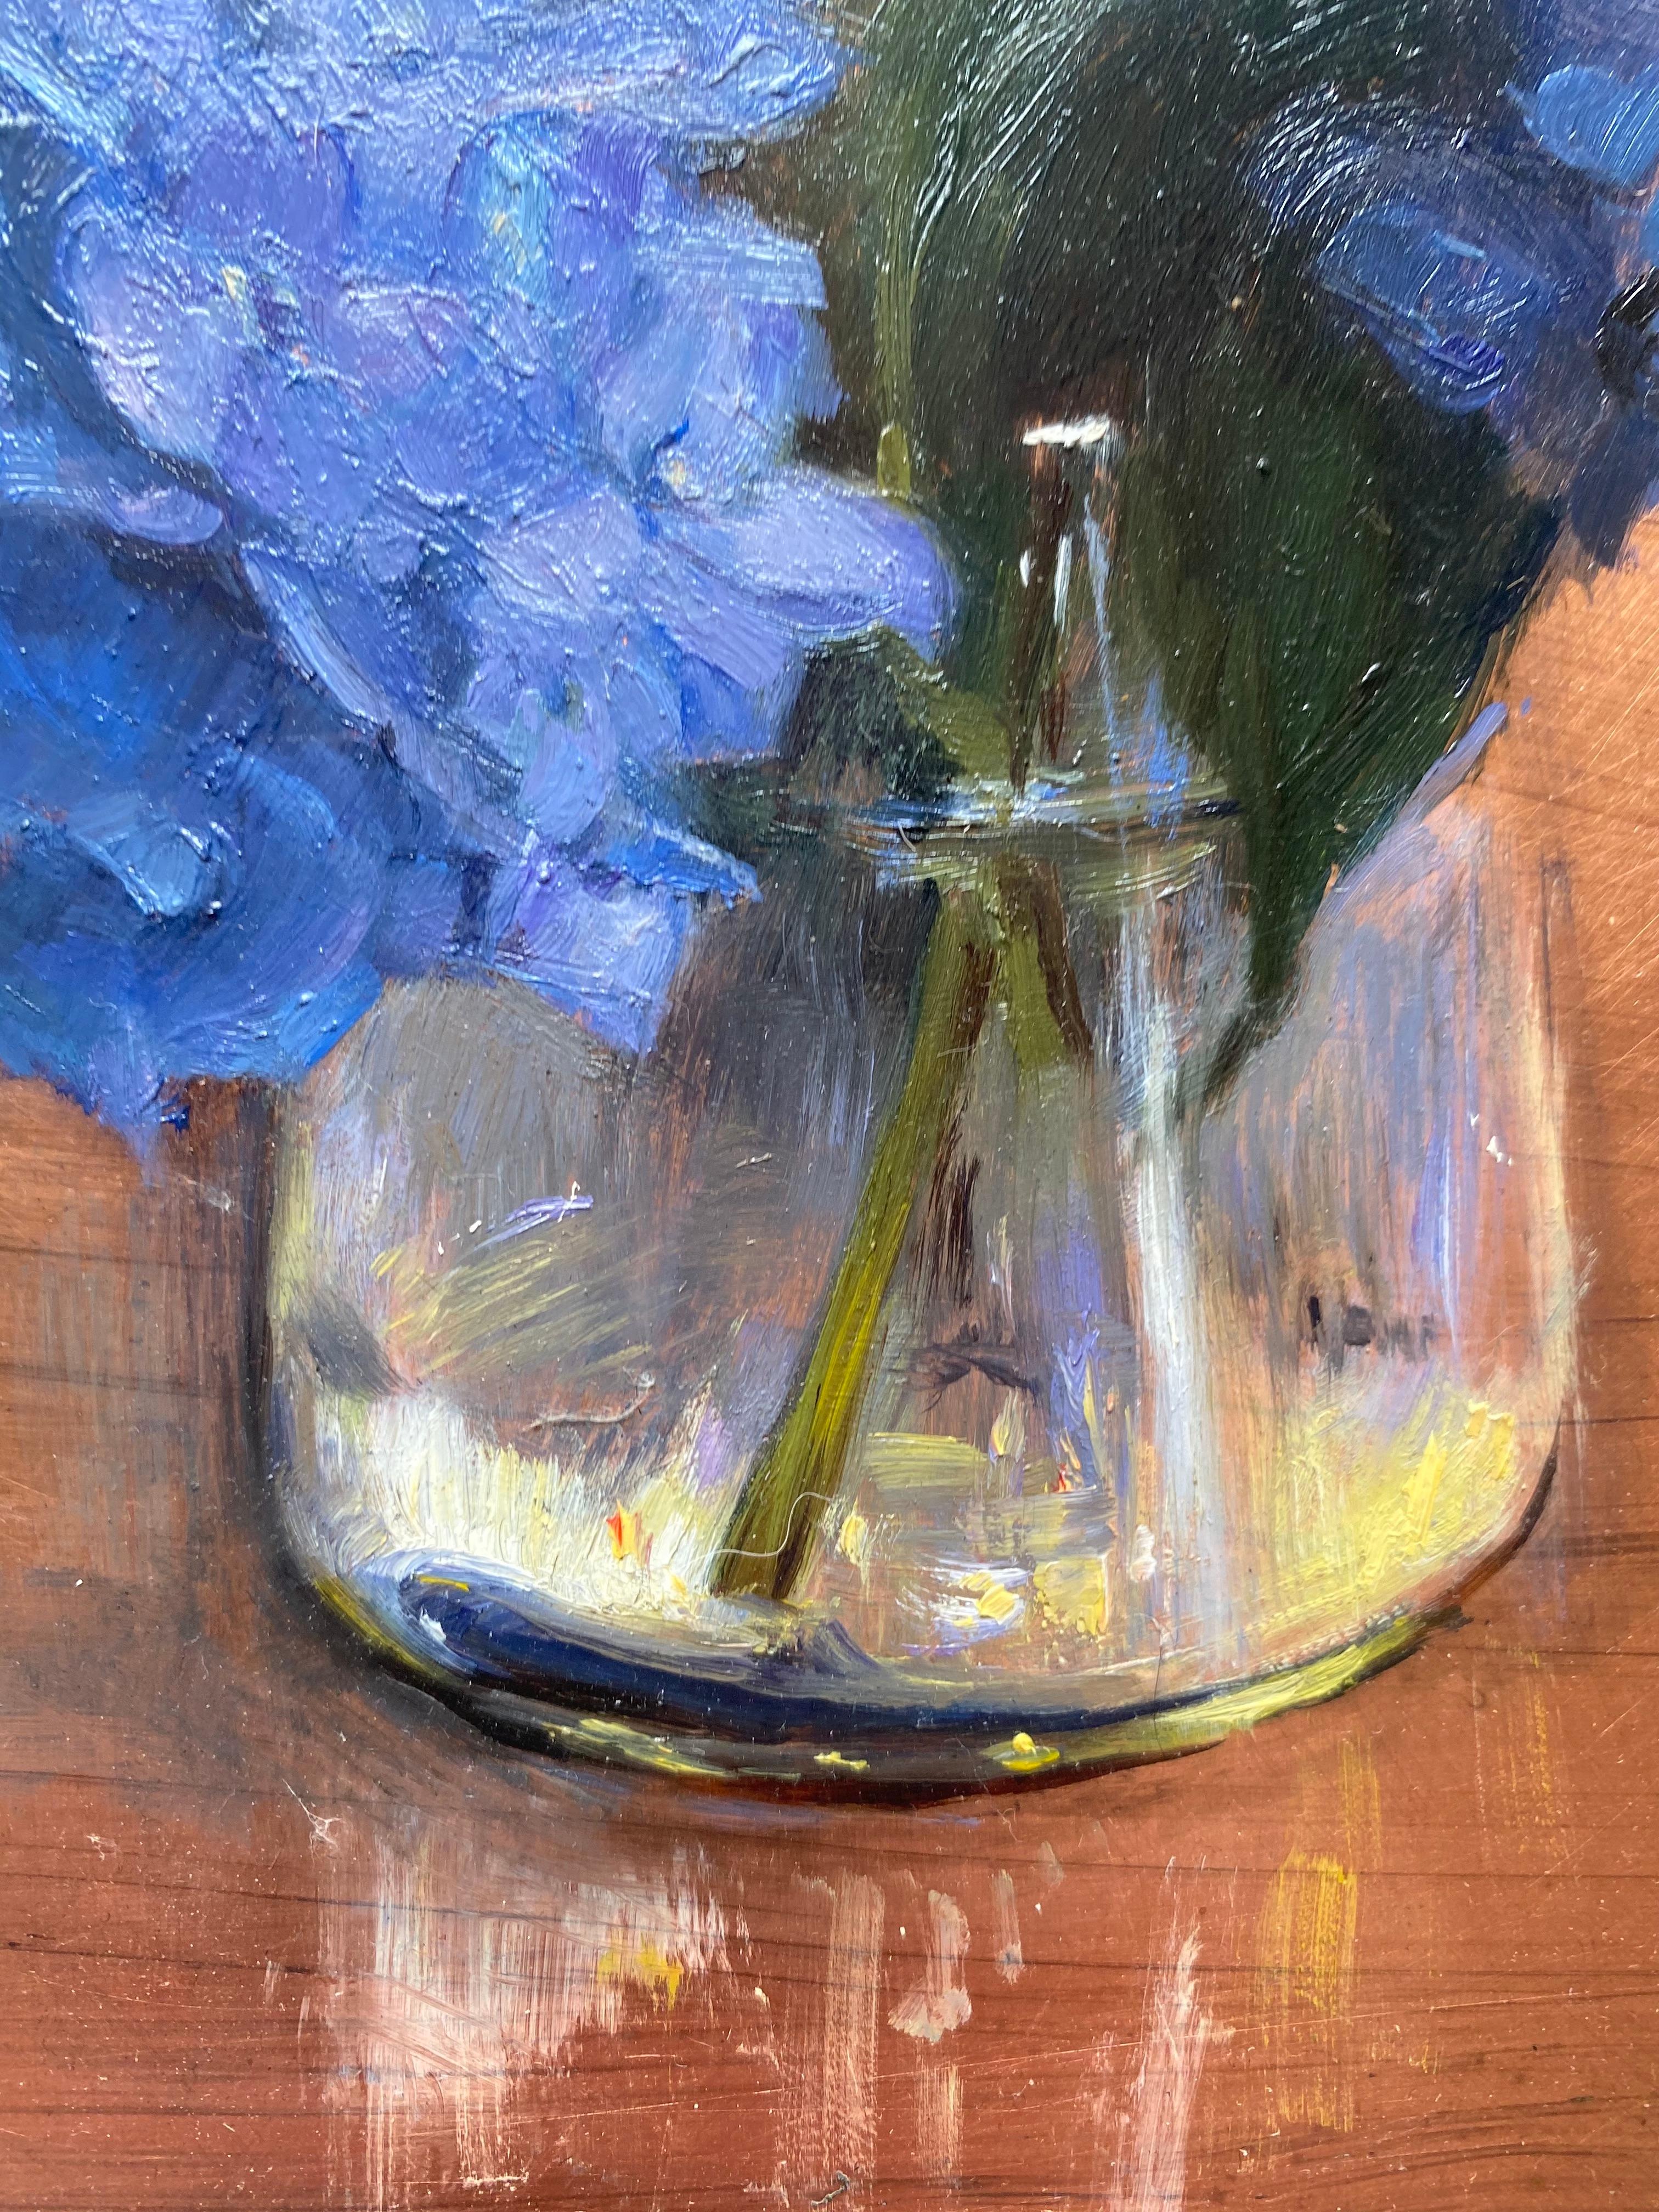 Painted with oil on a small 8 inch by 6 inch slate of copper, a small arrangement of blue hydrangeas. The artist, Melissa Franklin Sanchez, allows the bare copper to speak for itself in the negative space. The glass vile that holds water and the